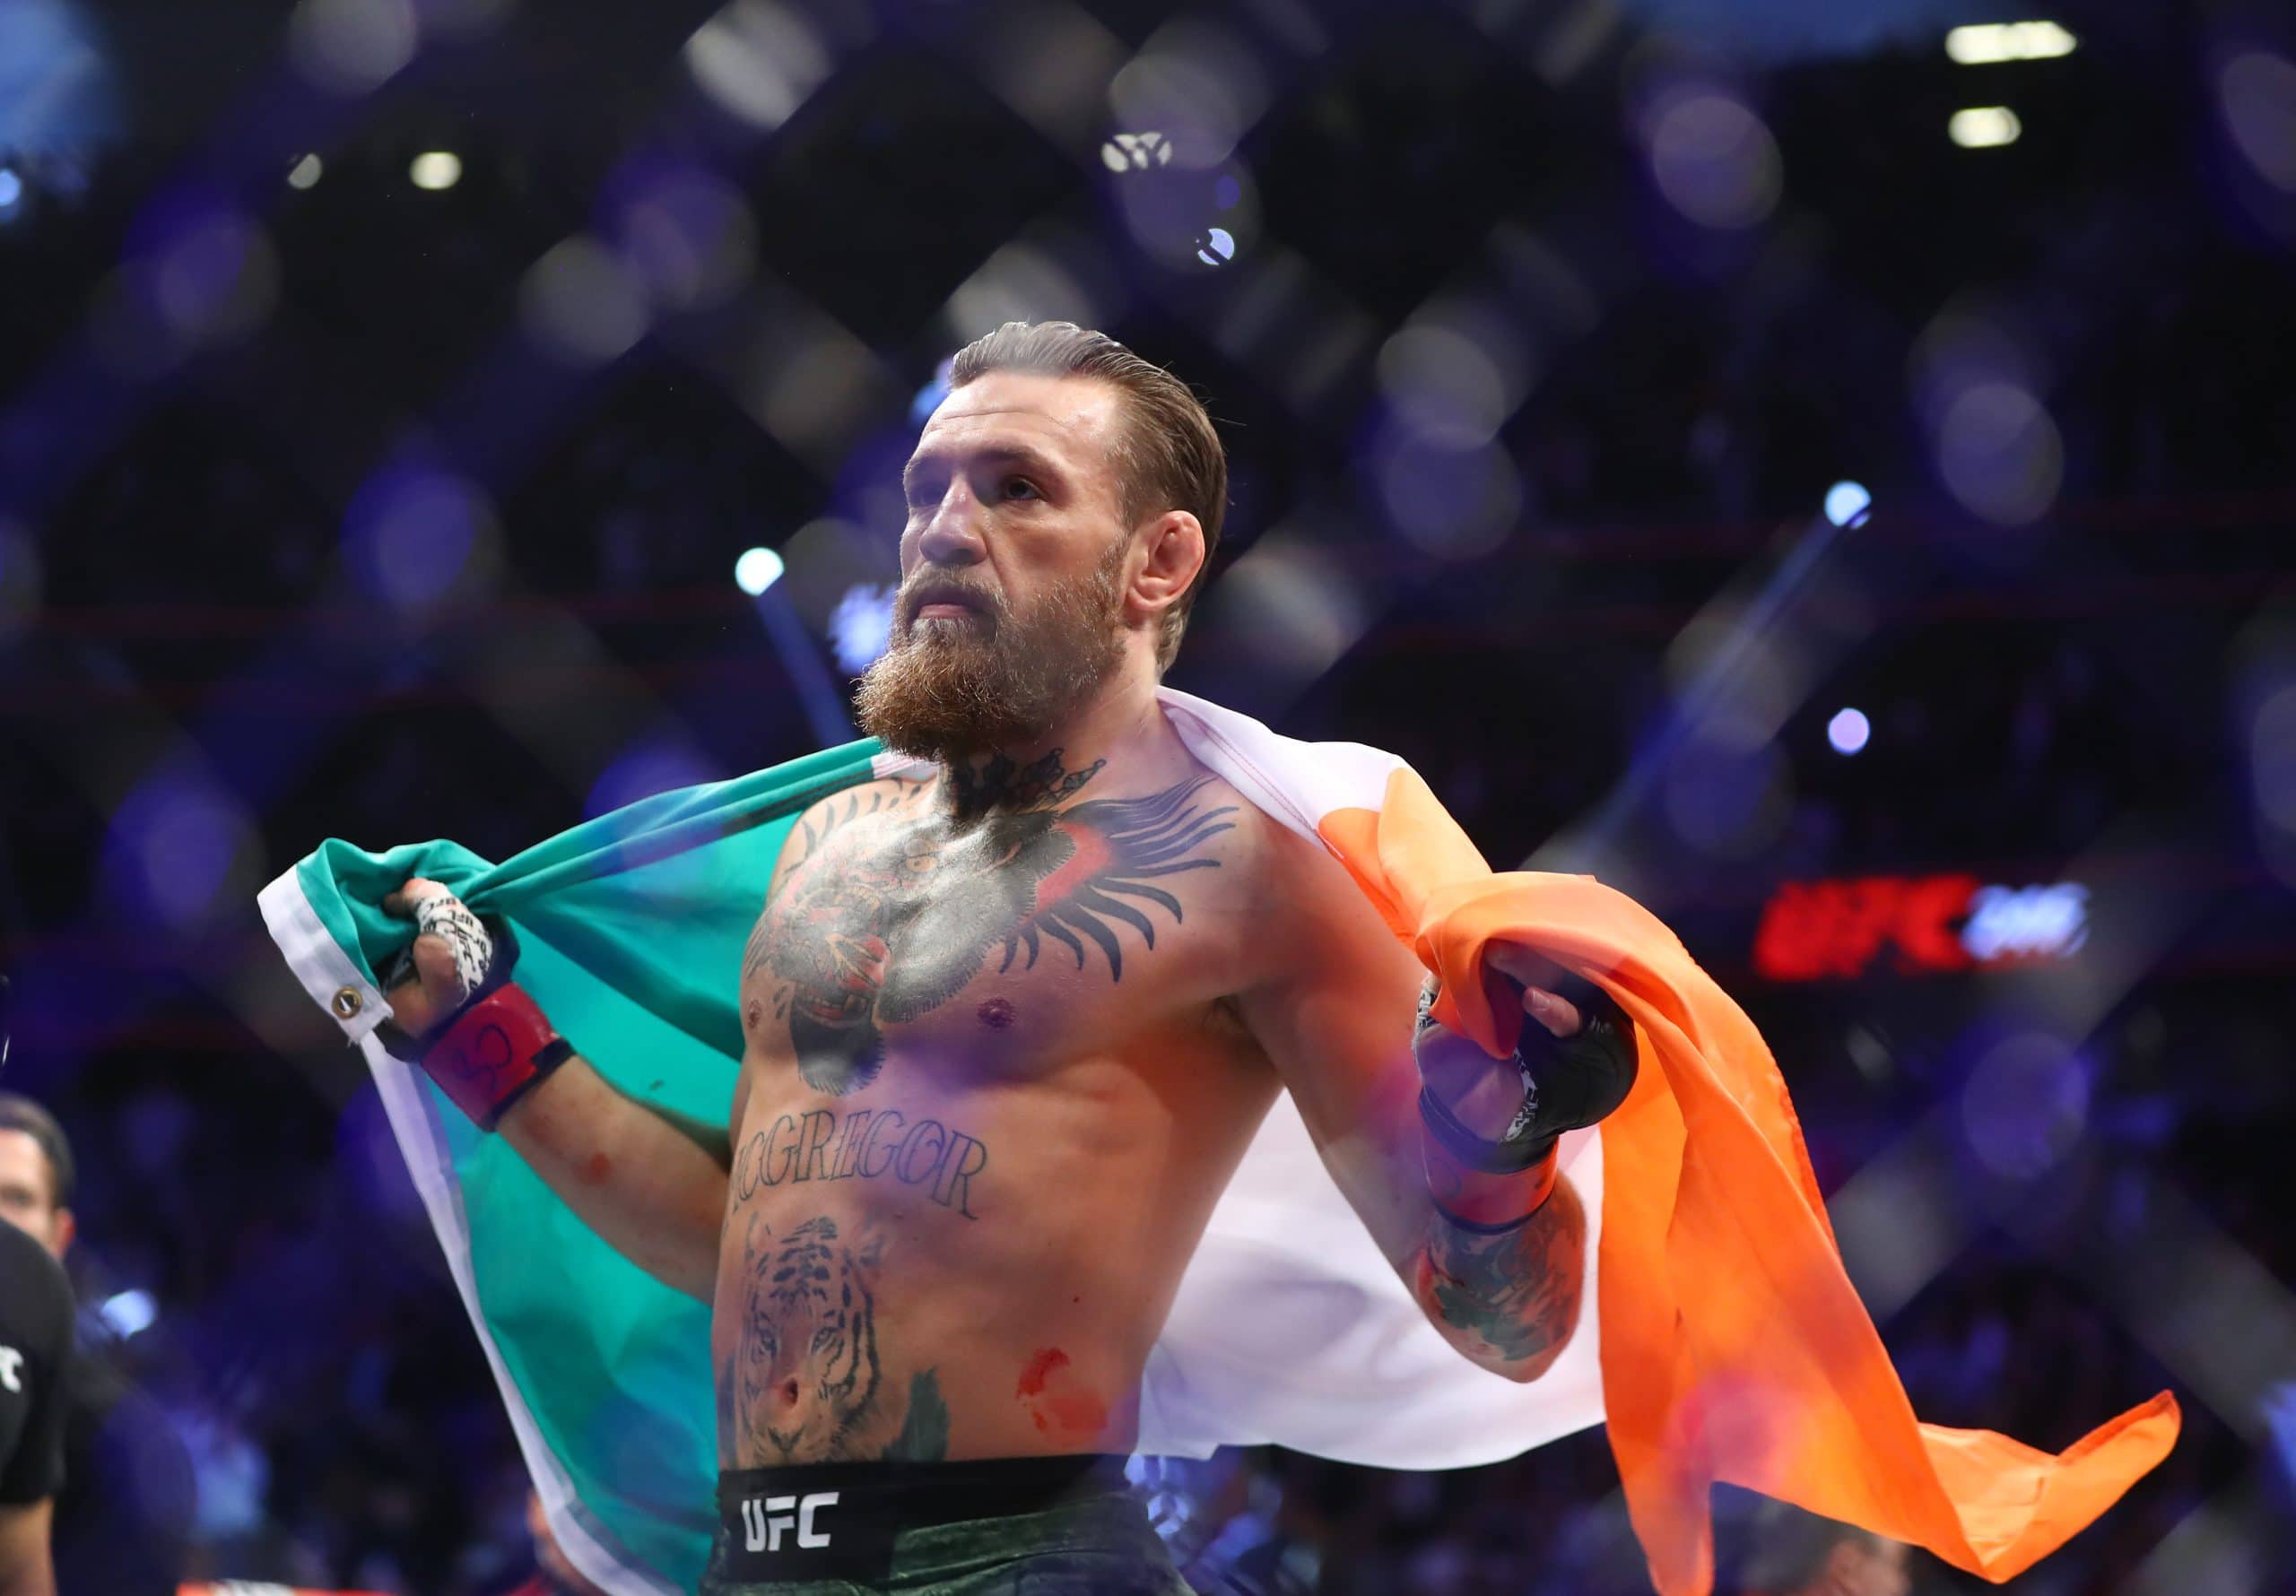 Conor McGregor Makes An Appearance At Bellator 275 In Dublin